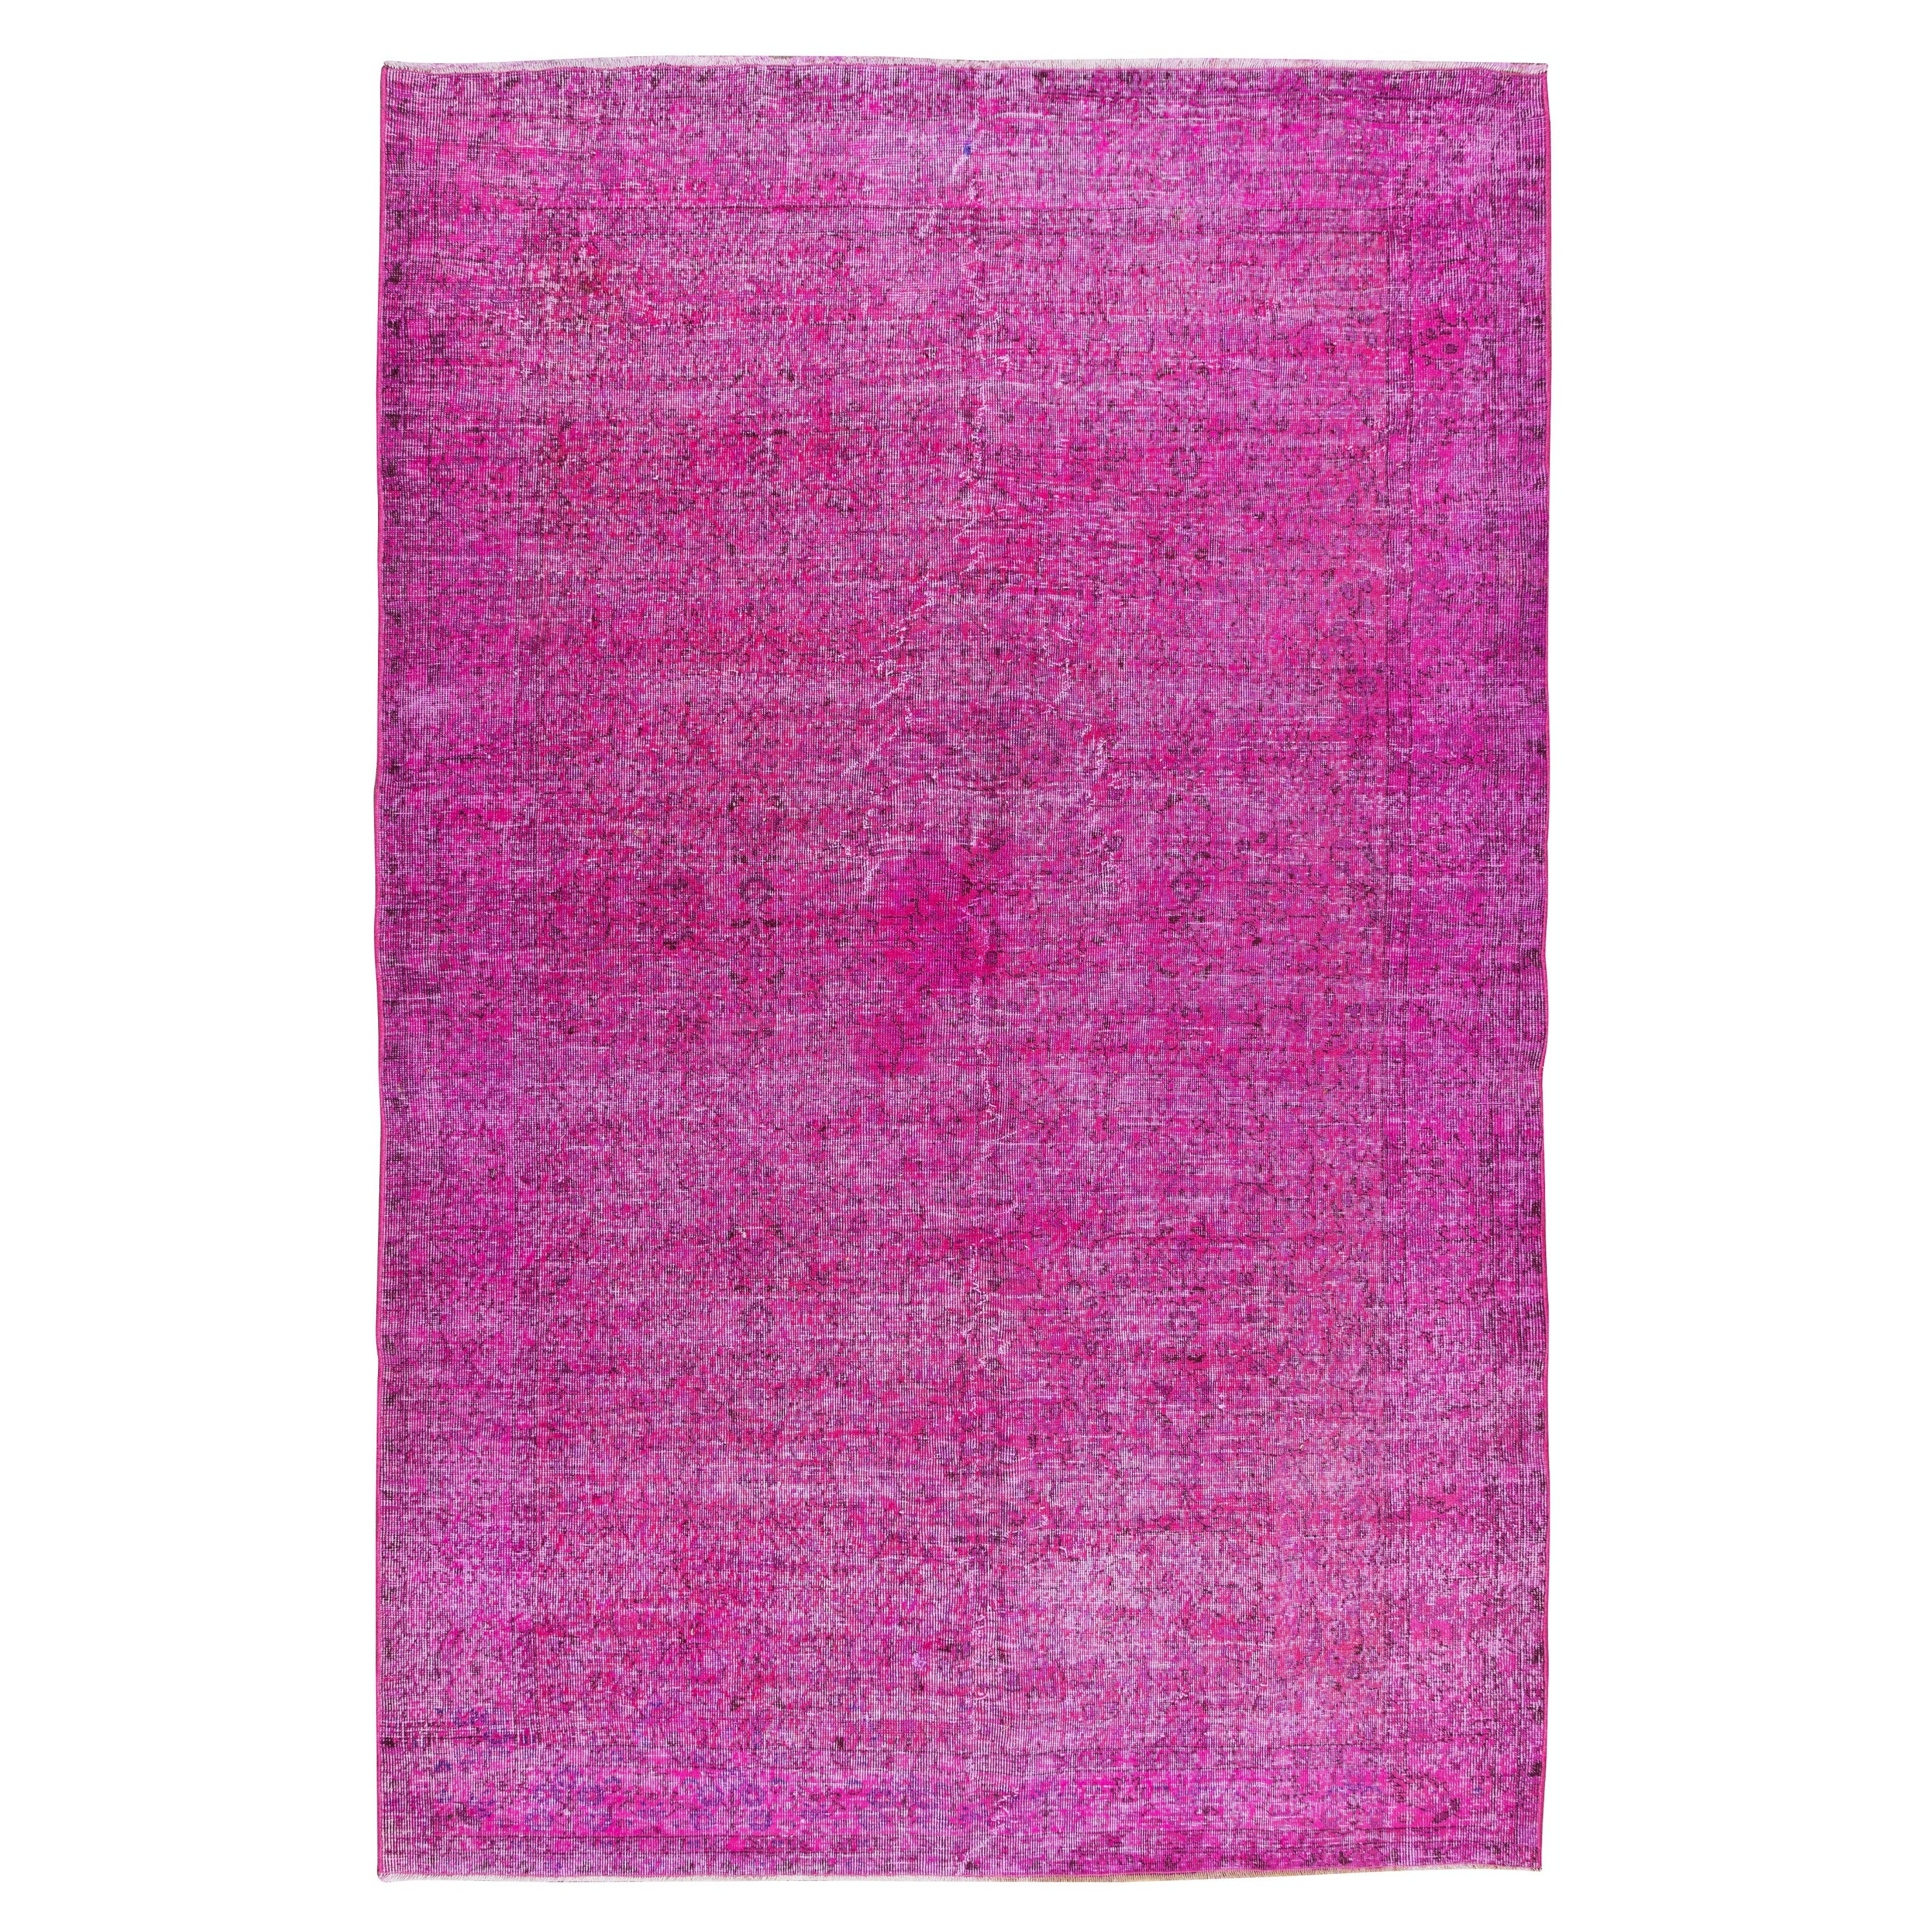 6.7x10.4 Ft Hand Knotted Anatolian Area Rug in Fuchsia Pink 4 Modern Interiors For Sale